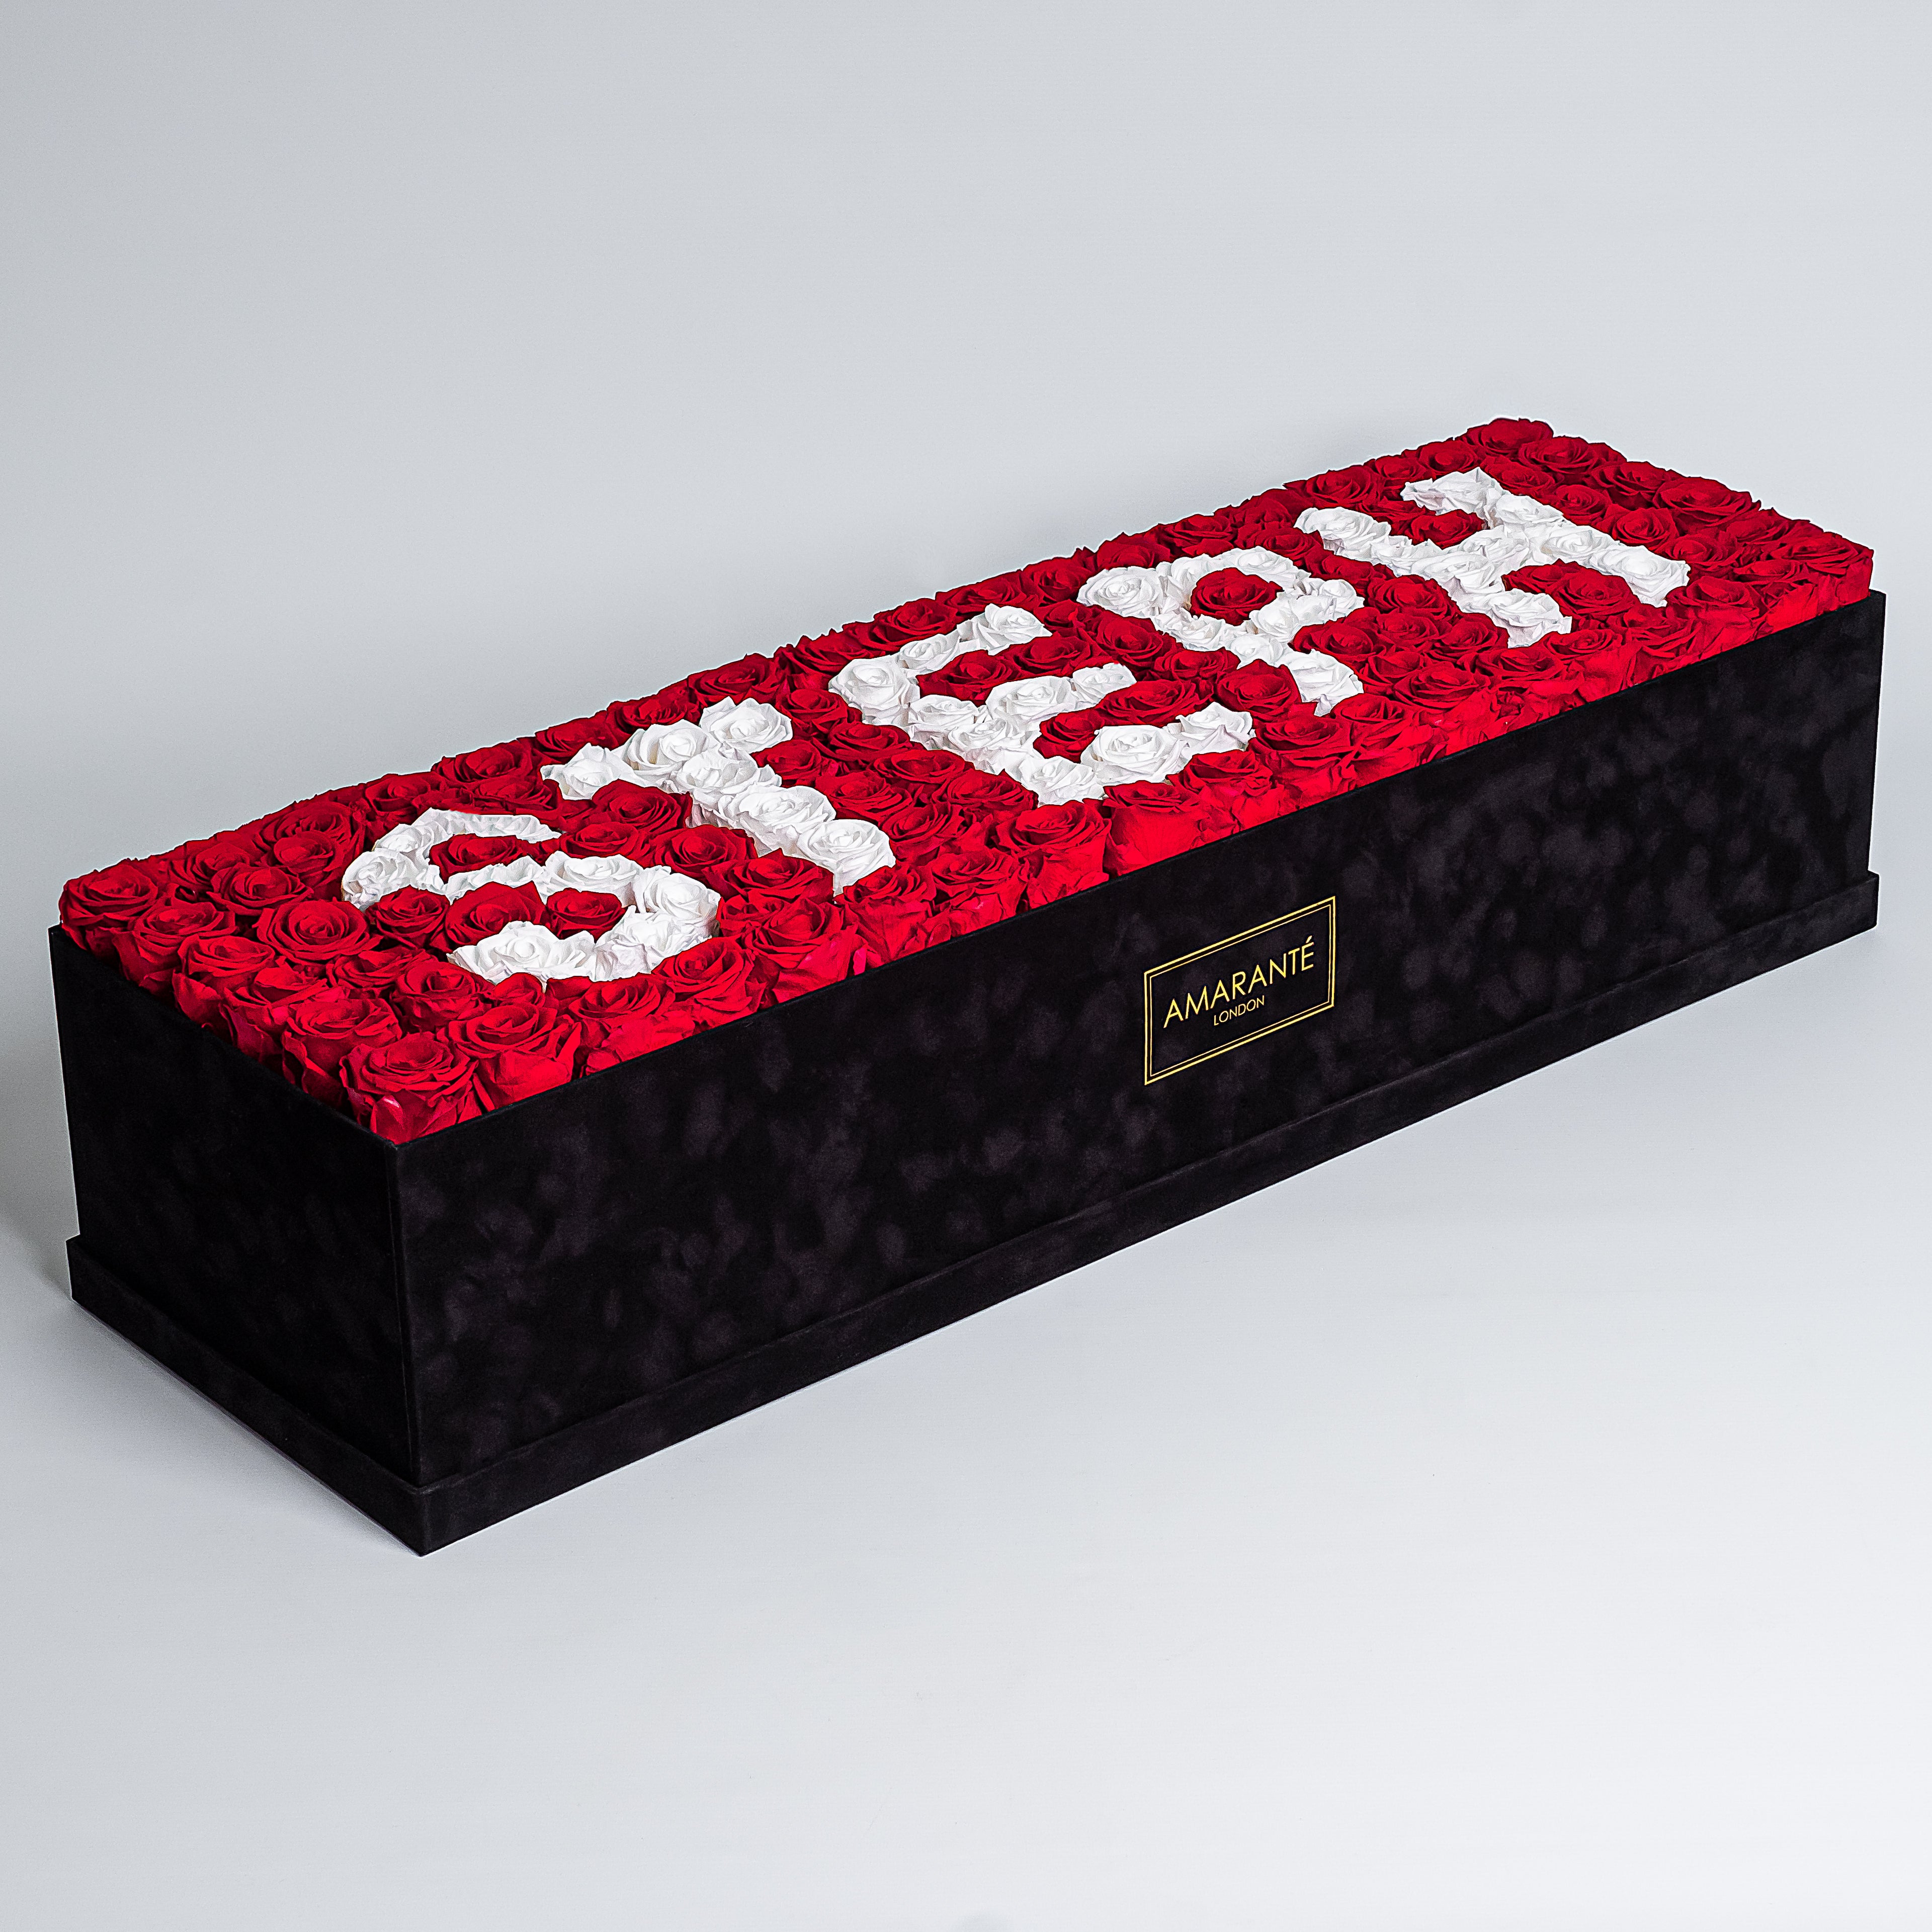 Captivating super deluxe black rectangular rose box, refined with a suede finish, housing 140 chic red and white infinity roses, symbolising enduring love with the name STEPH. Free UK delivery, Box size: 30"x25".